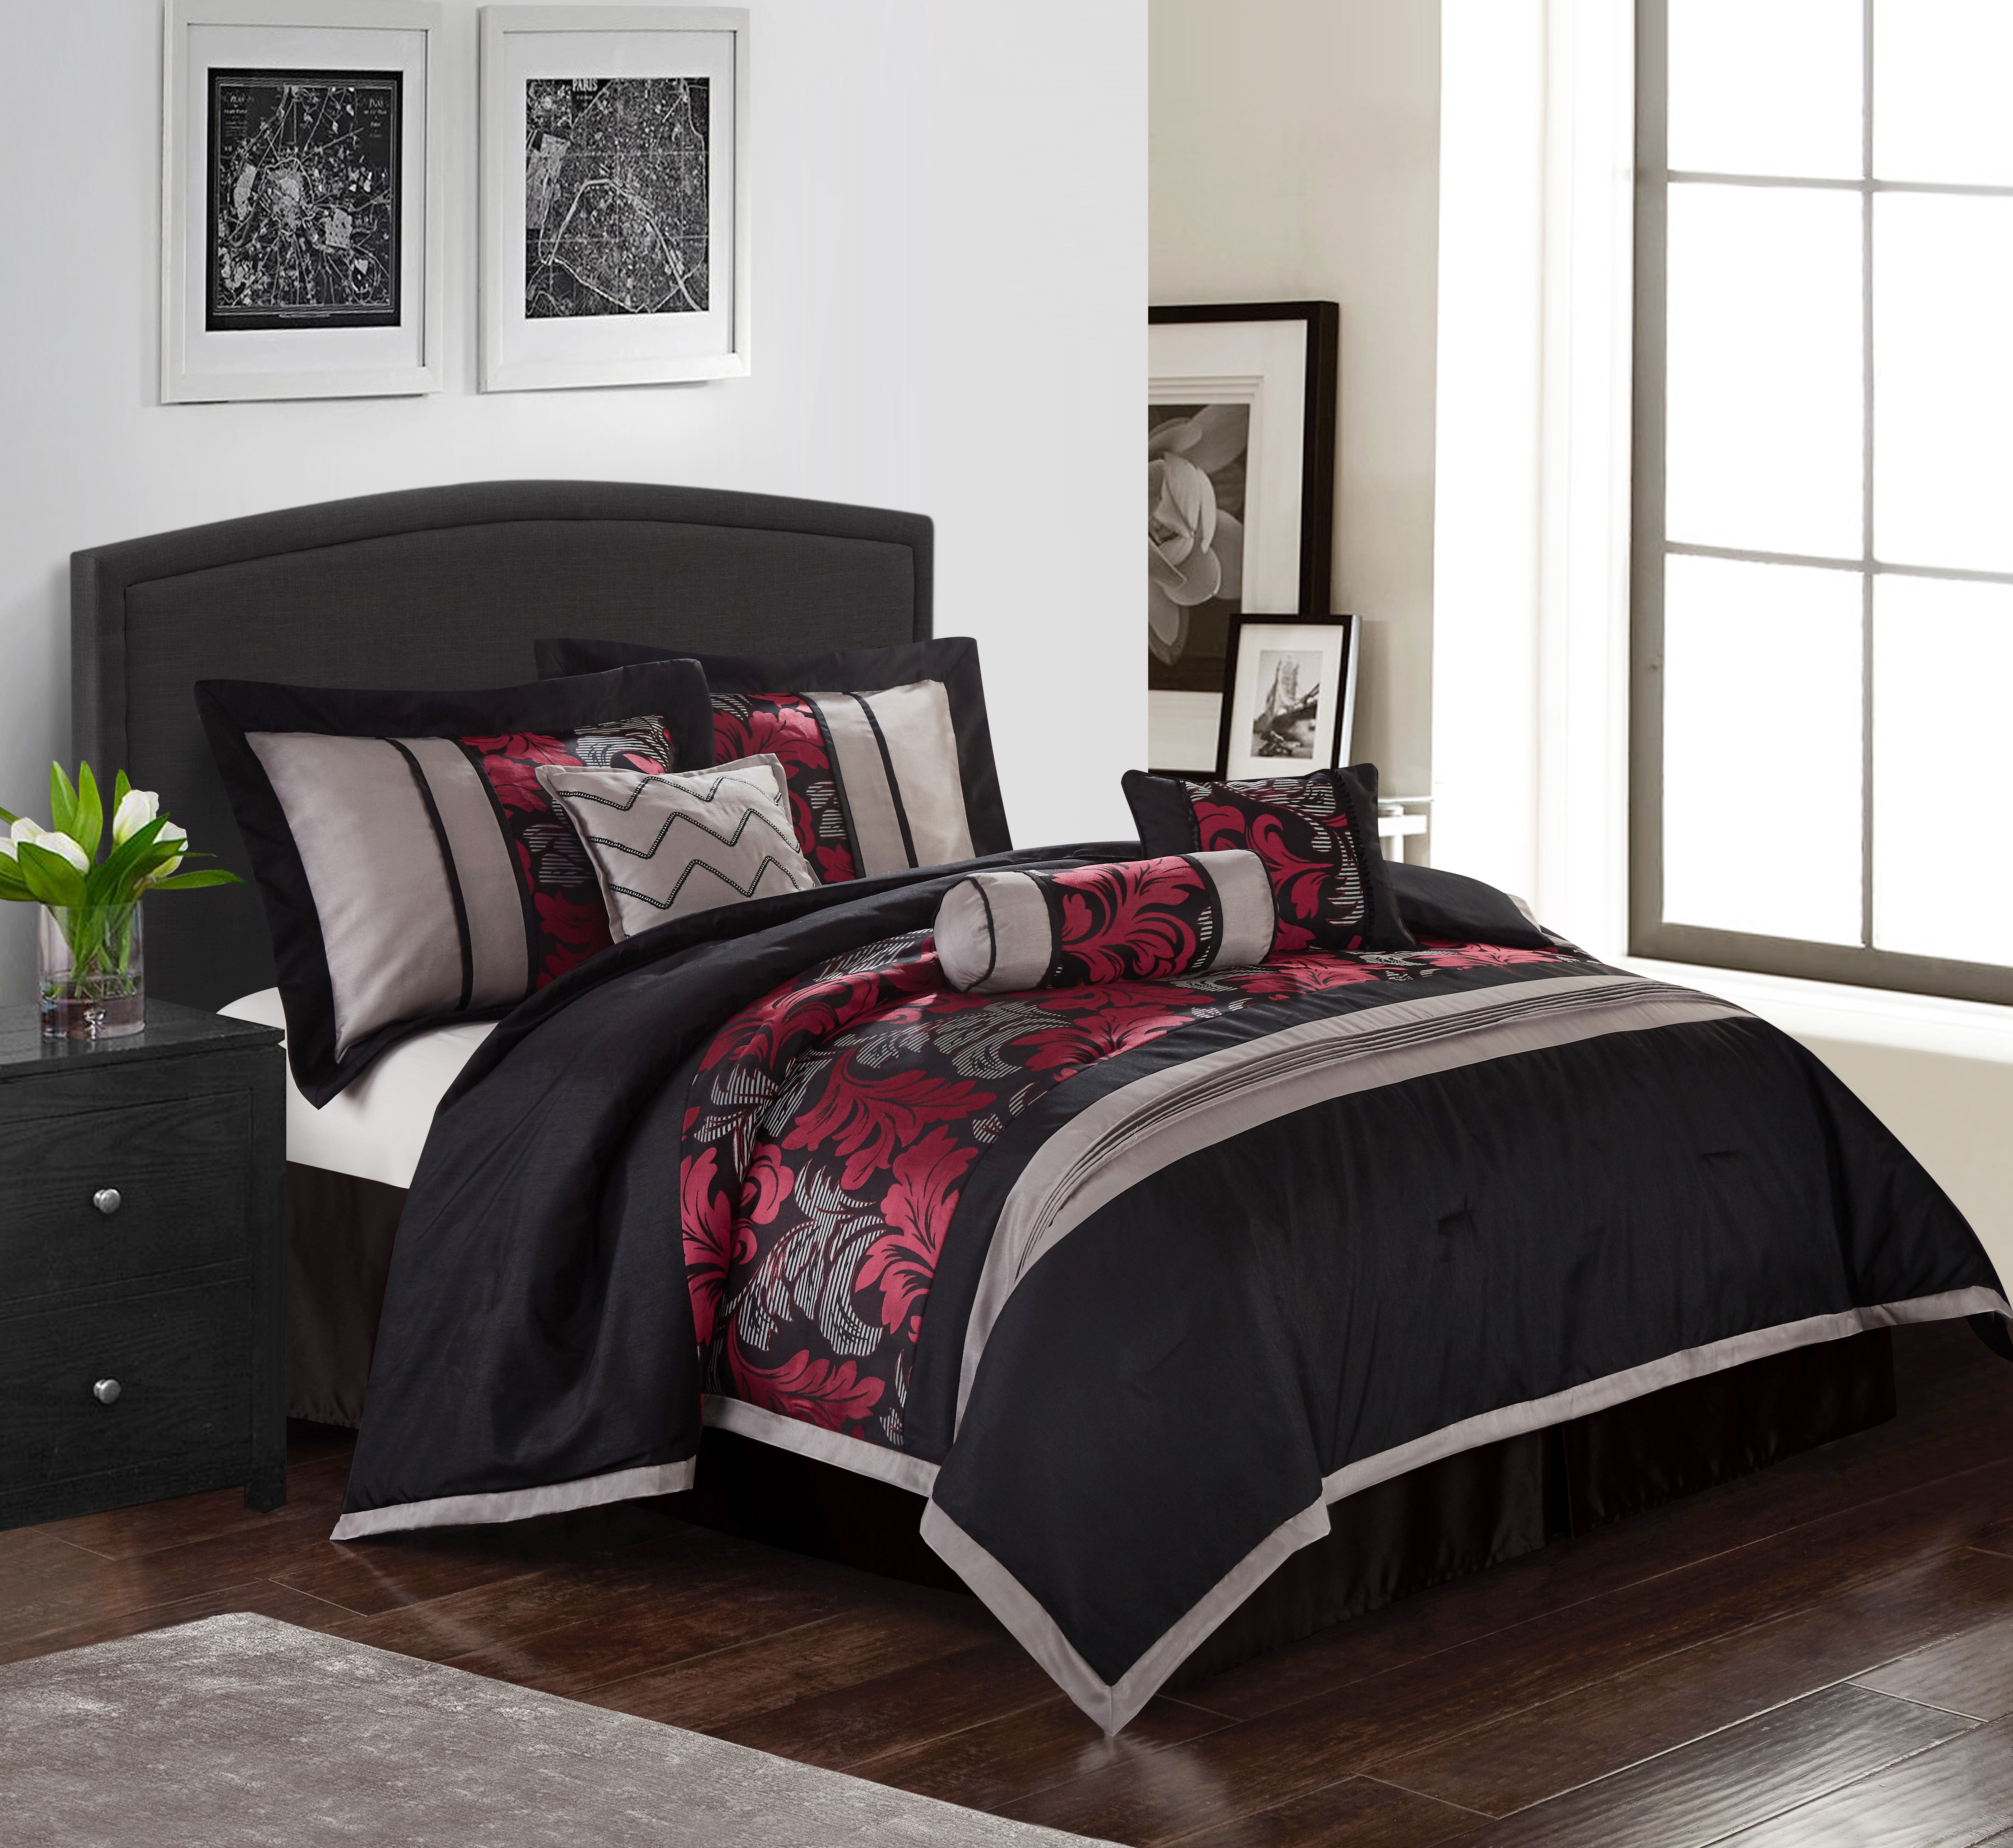 Lanco Printed Polyester 7 Piece Comforter Sets Queen Black All